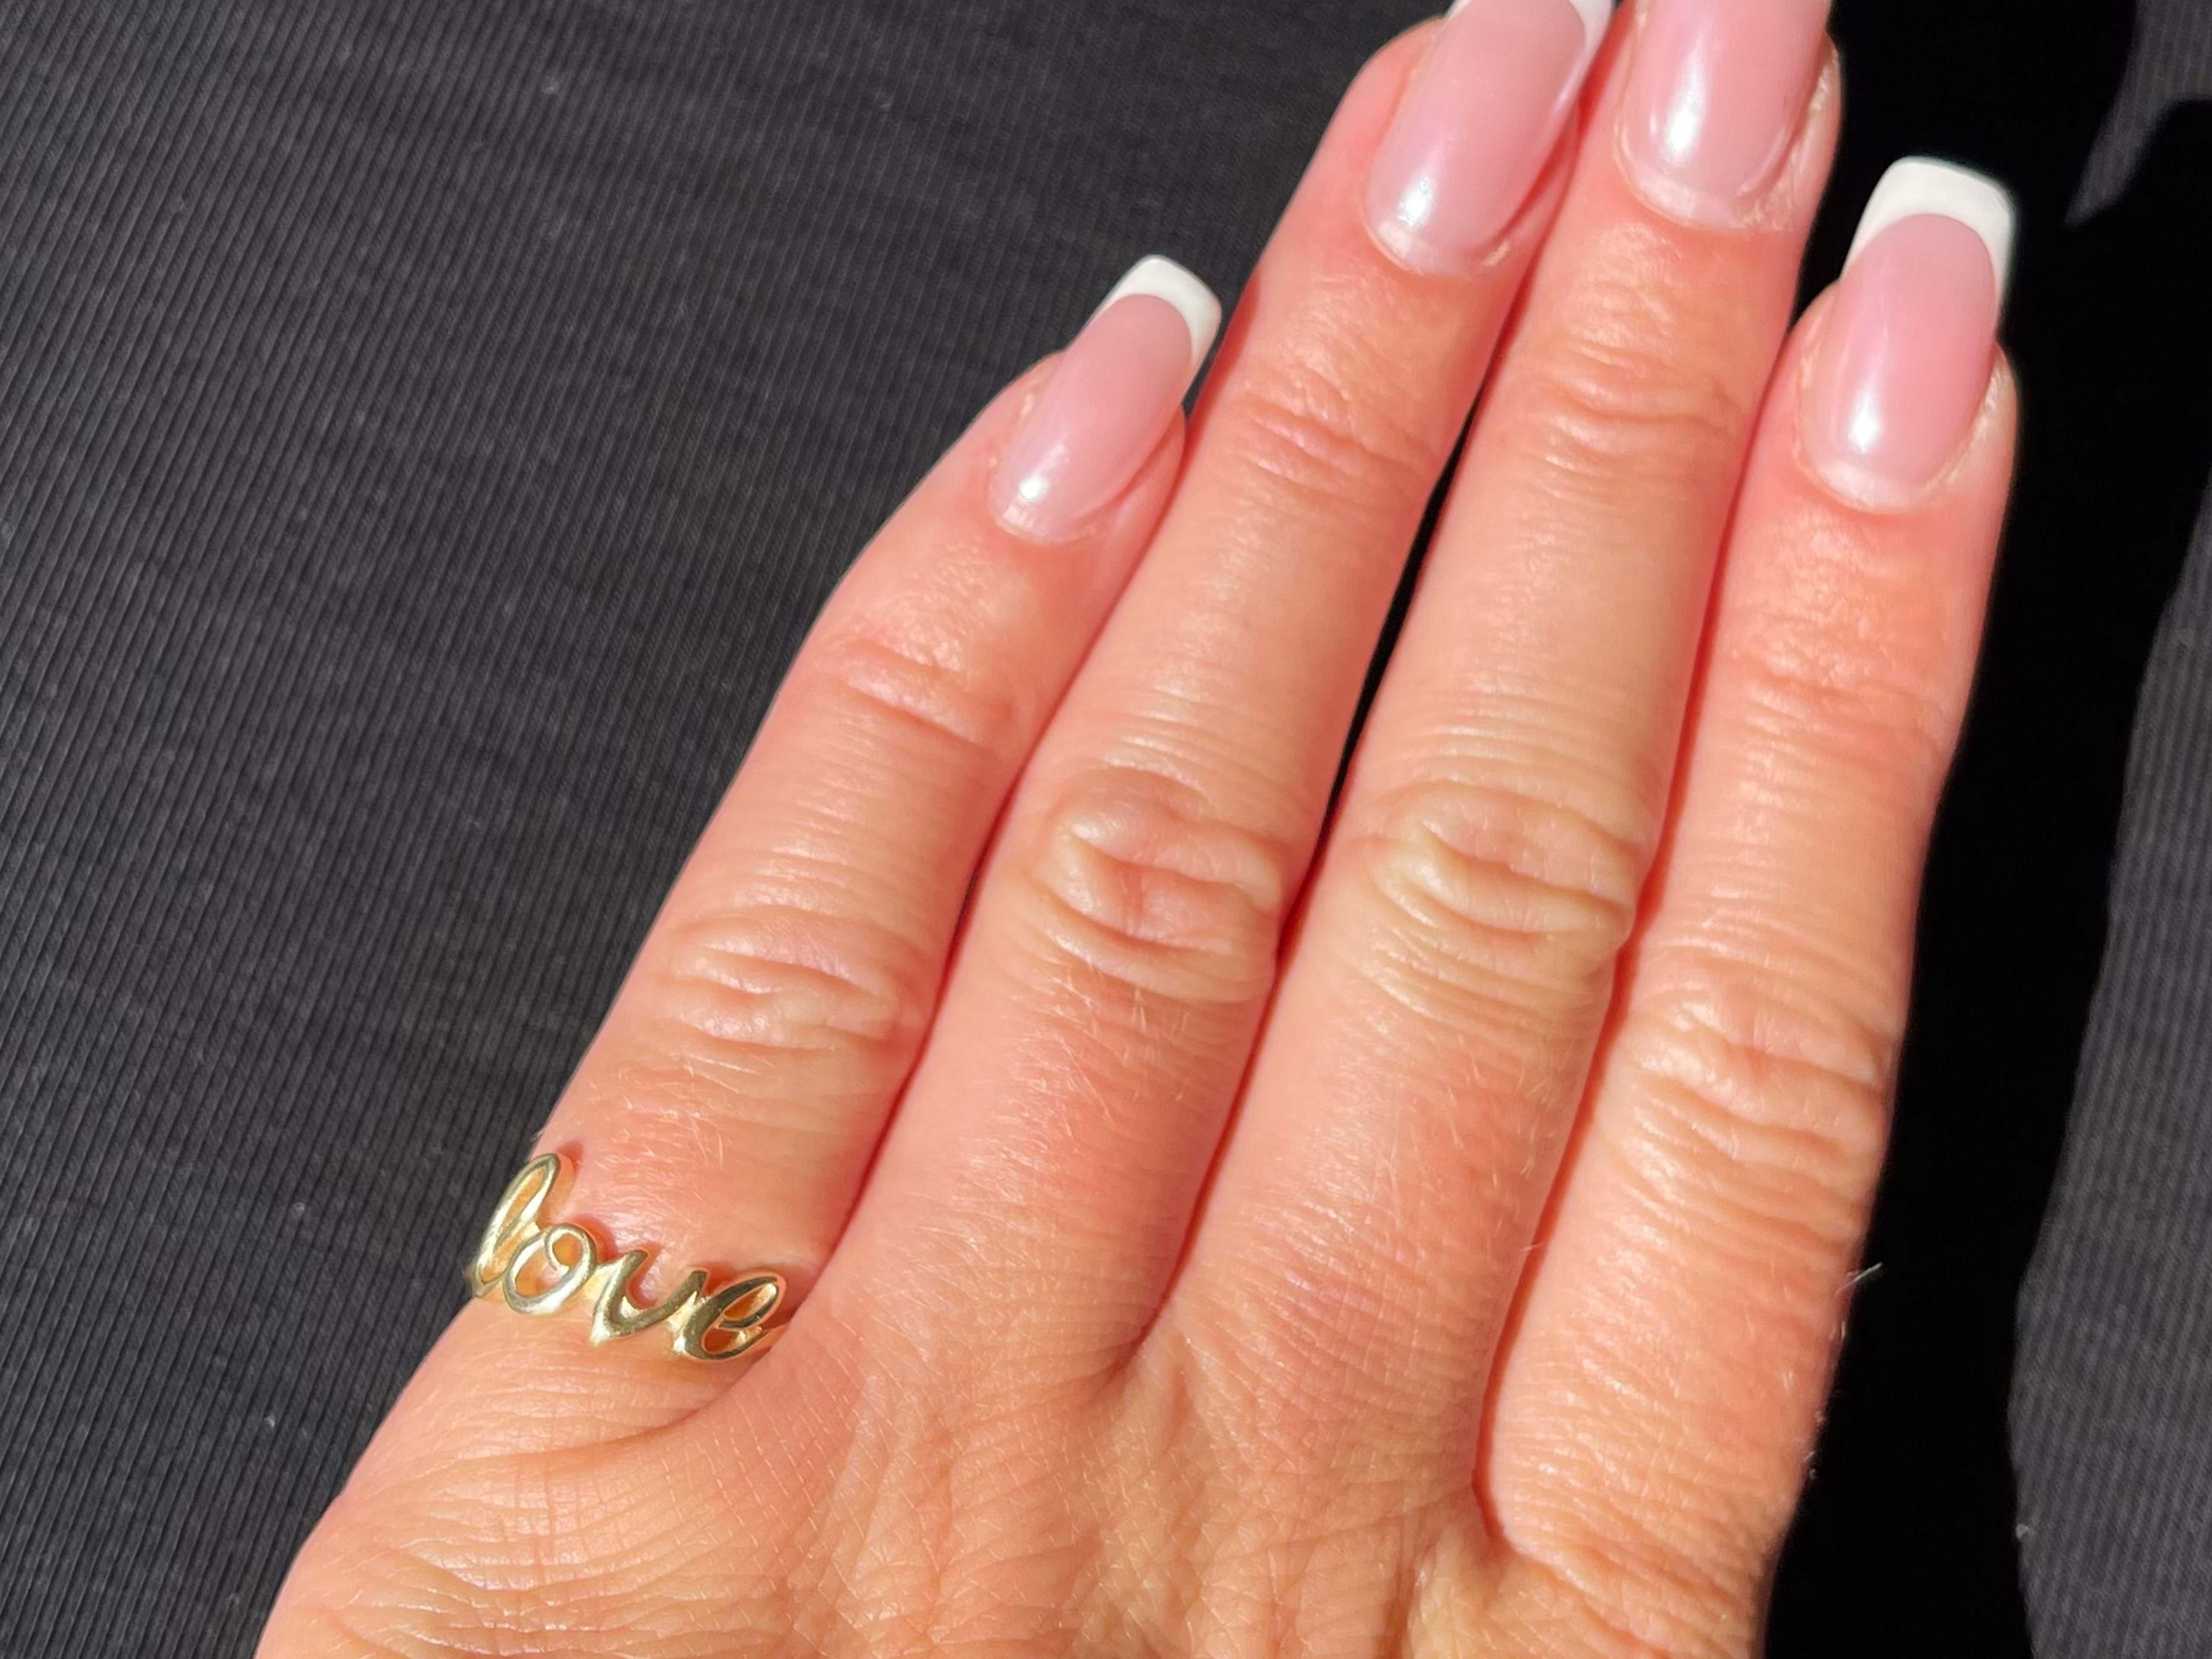 Item Specifications:
​
​Designer: James Avery

Metal: 14K Yellow Gold

Total Weight: 2.2 Grams

Ring Size: 5.5

Condition: Preowned, excellent

Stamped: 